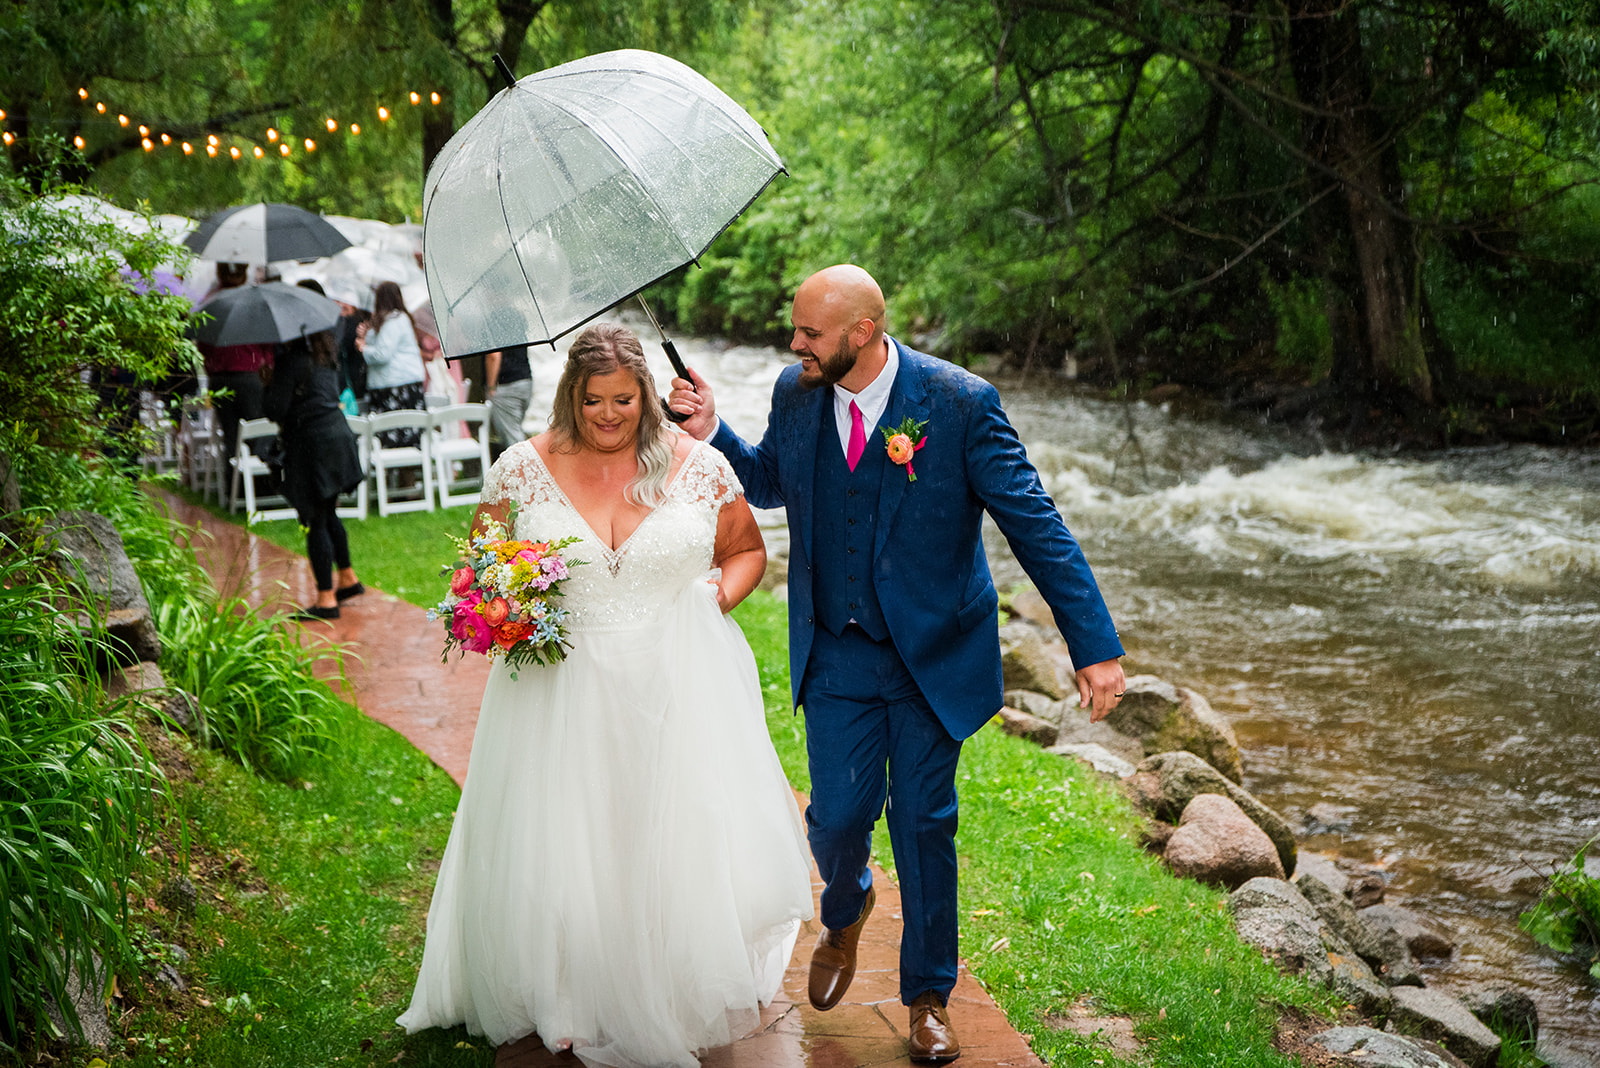 The bride and groom walk toward the camera hand-in-hand as the groom holds a clear umbrella above them.